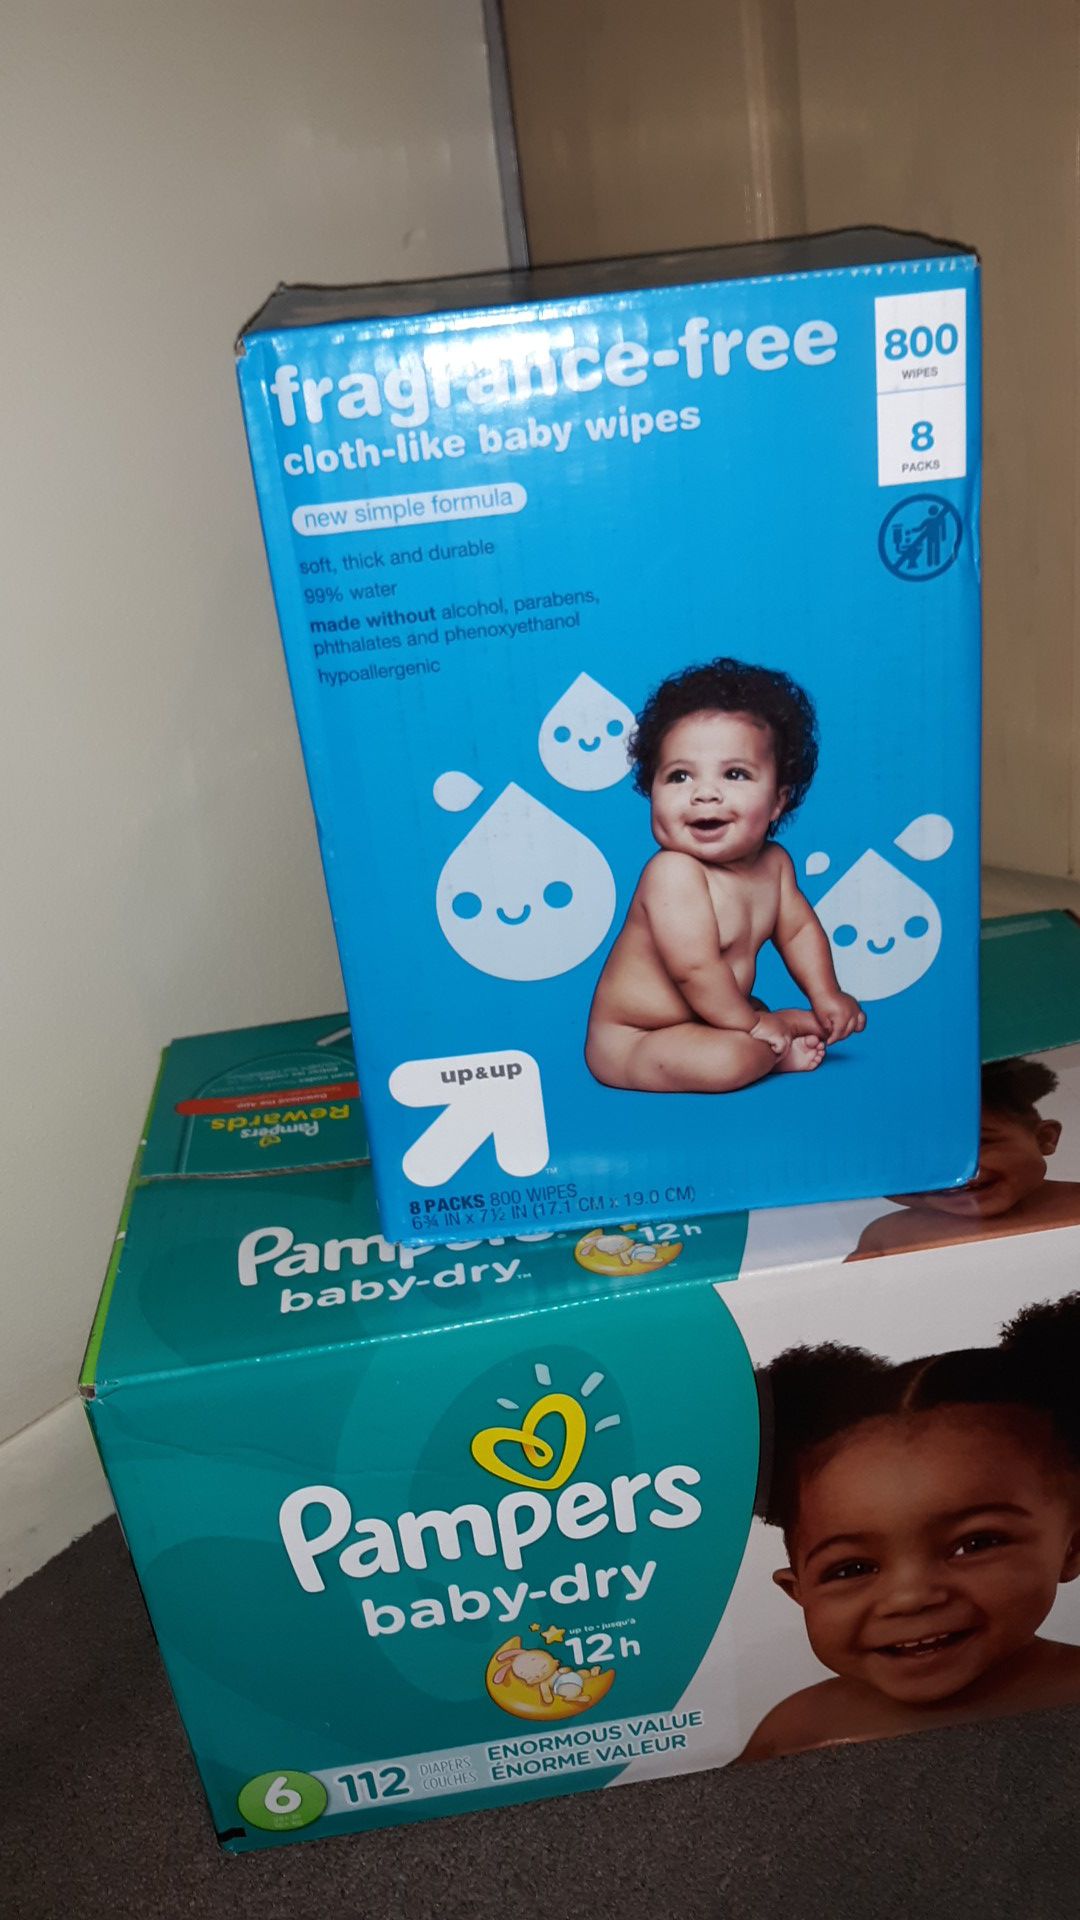 Diapers Pampers Baby Dry size 6 (112 count) and baby Wipes (800 count) other sizes available PAÑALES otros tamaños disponible